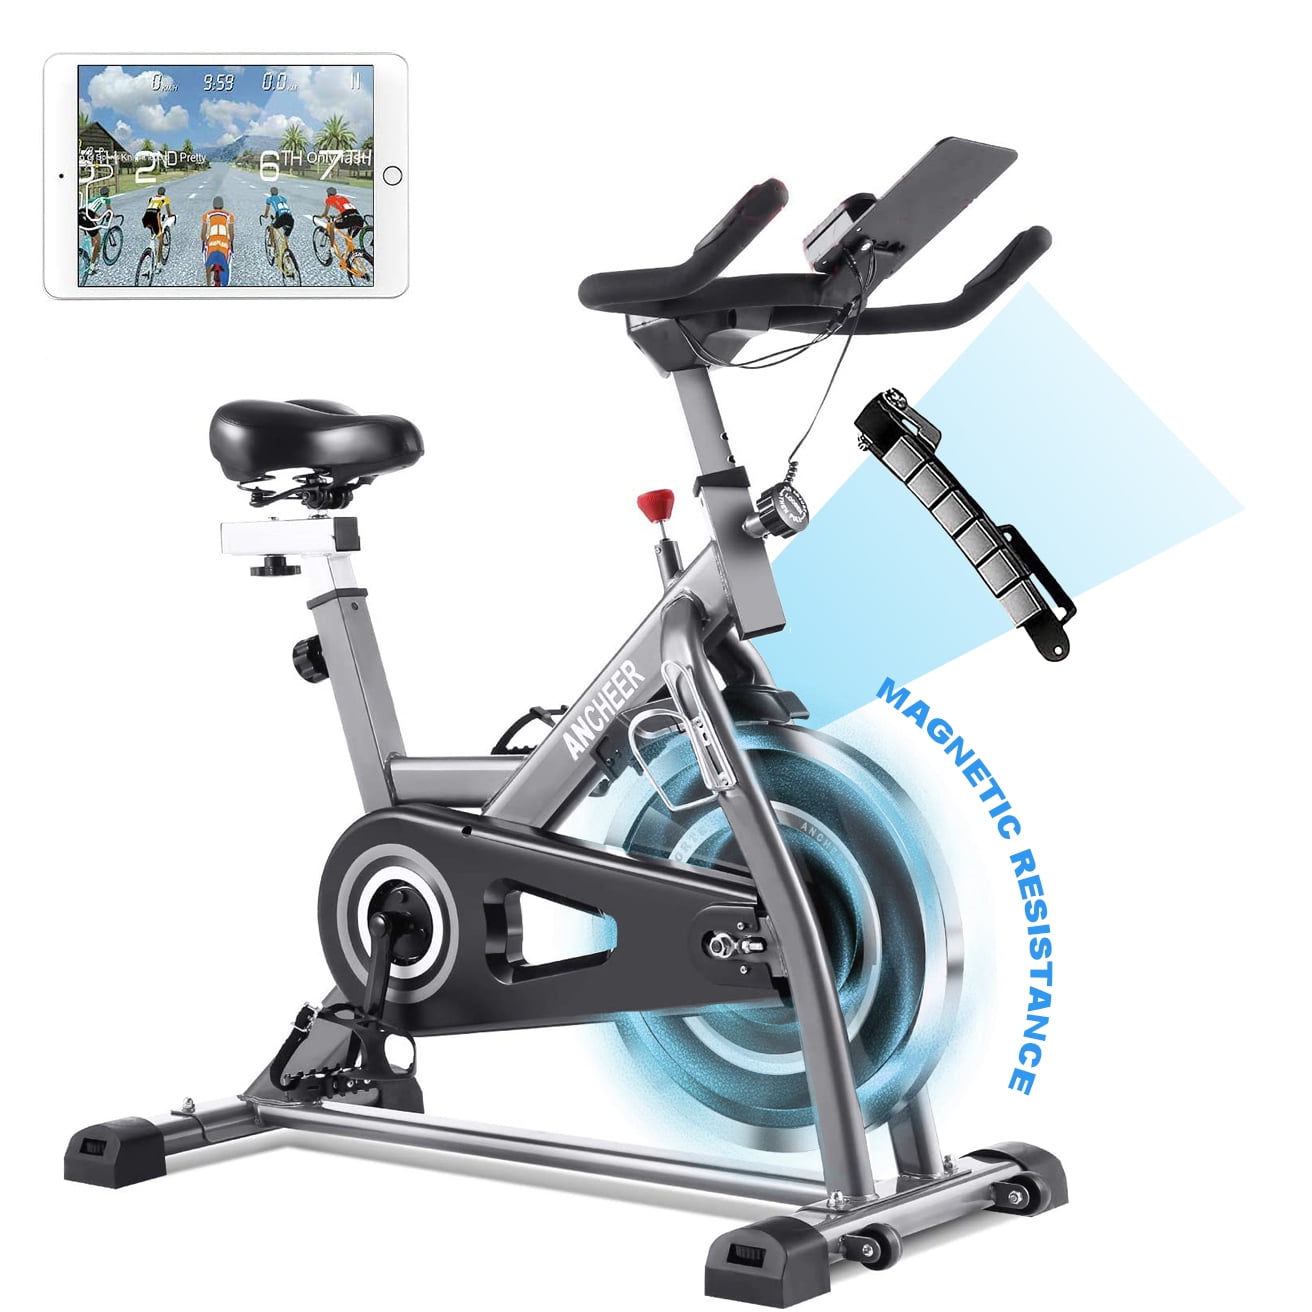 Details about   ANCHEER 3 in 1 Exercise Bike Slim Folding Bike Fitness Stationary Magnetic Cycle 